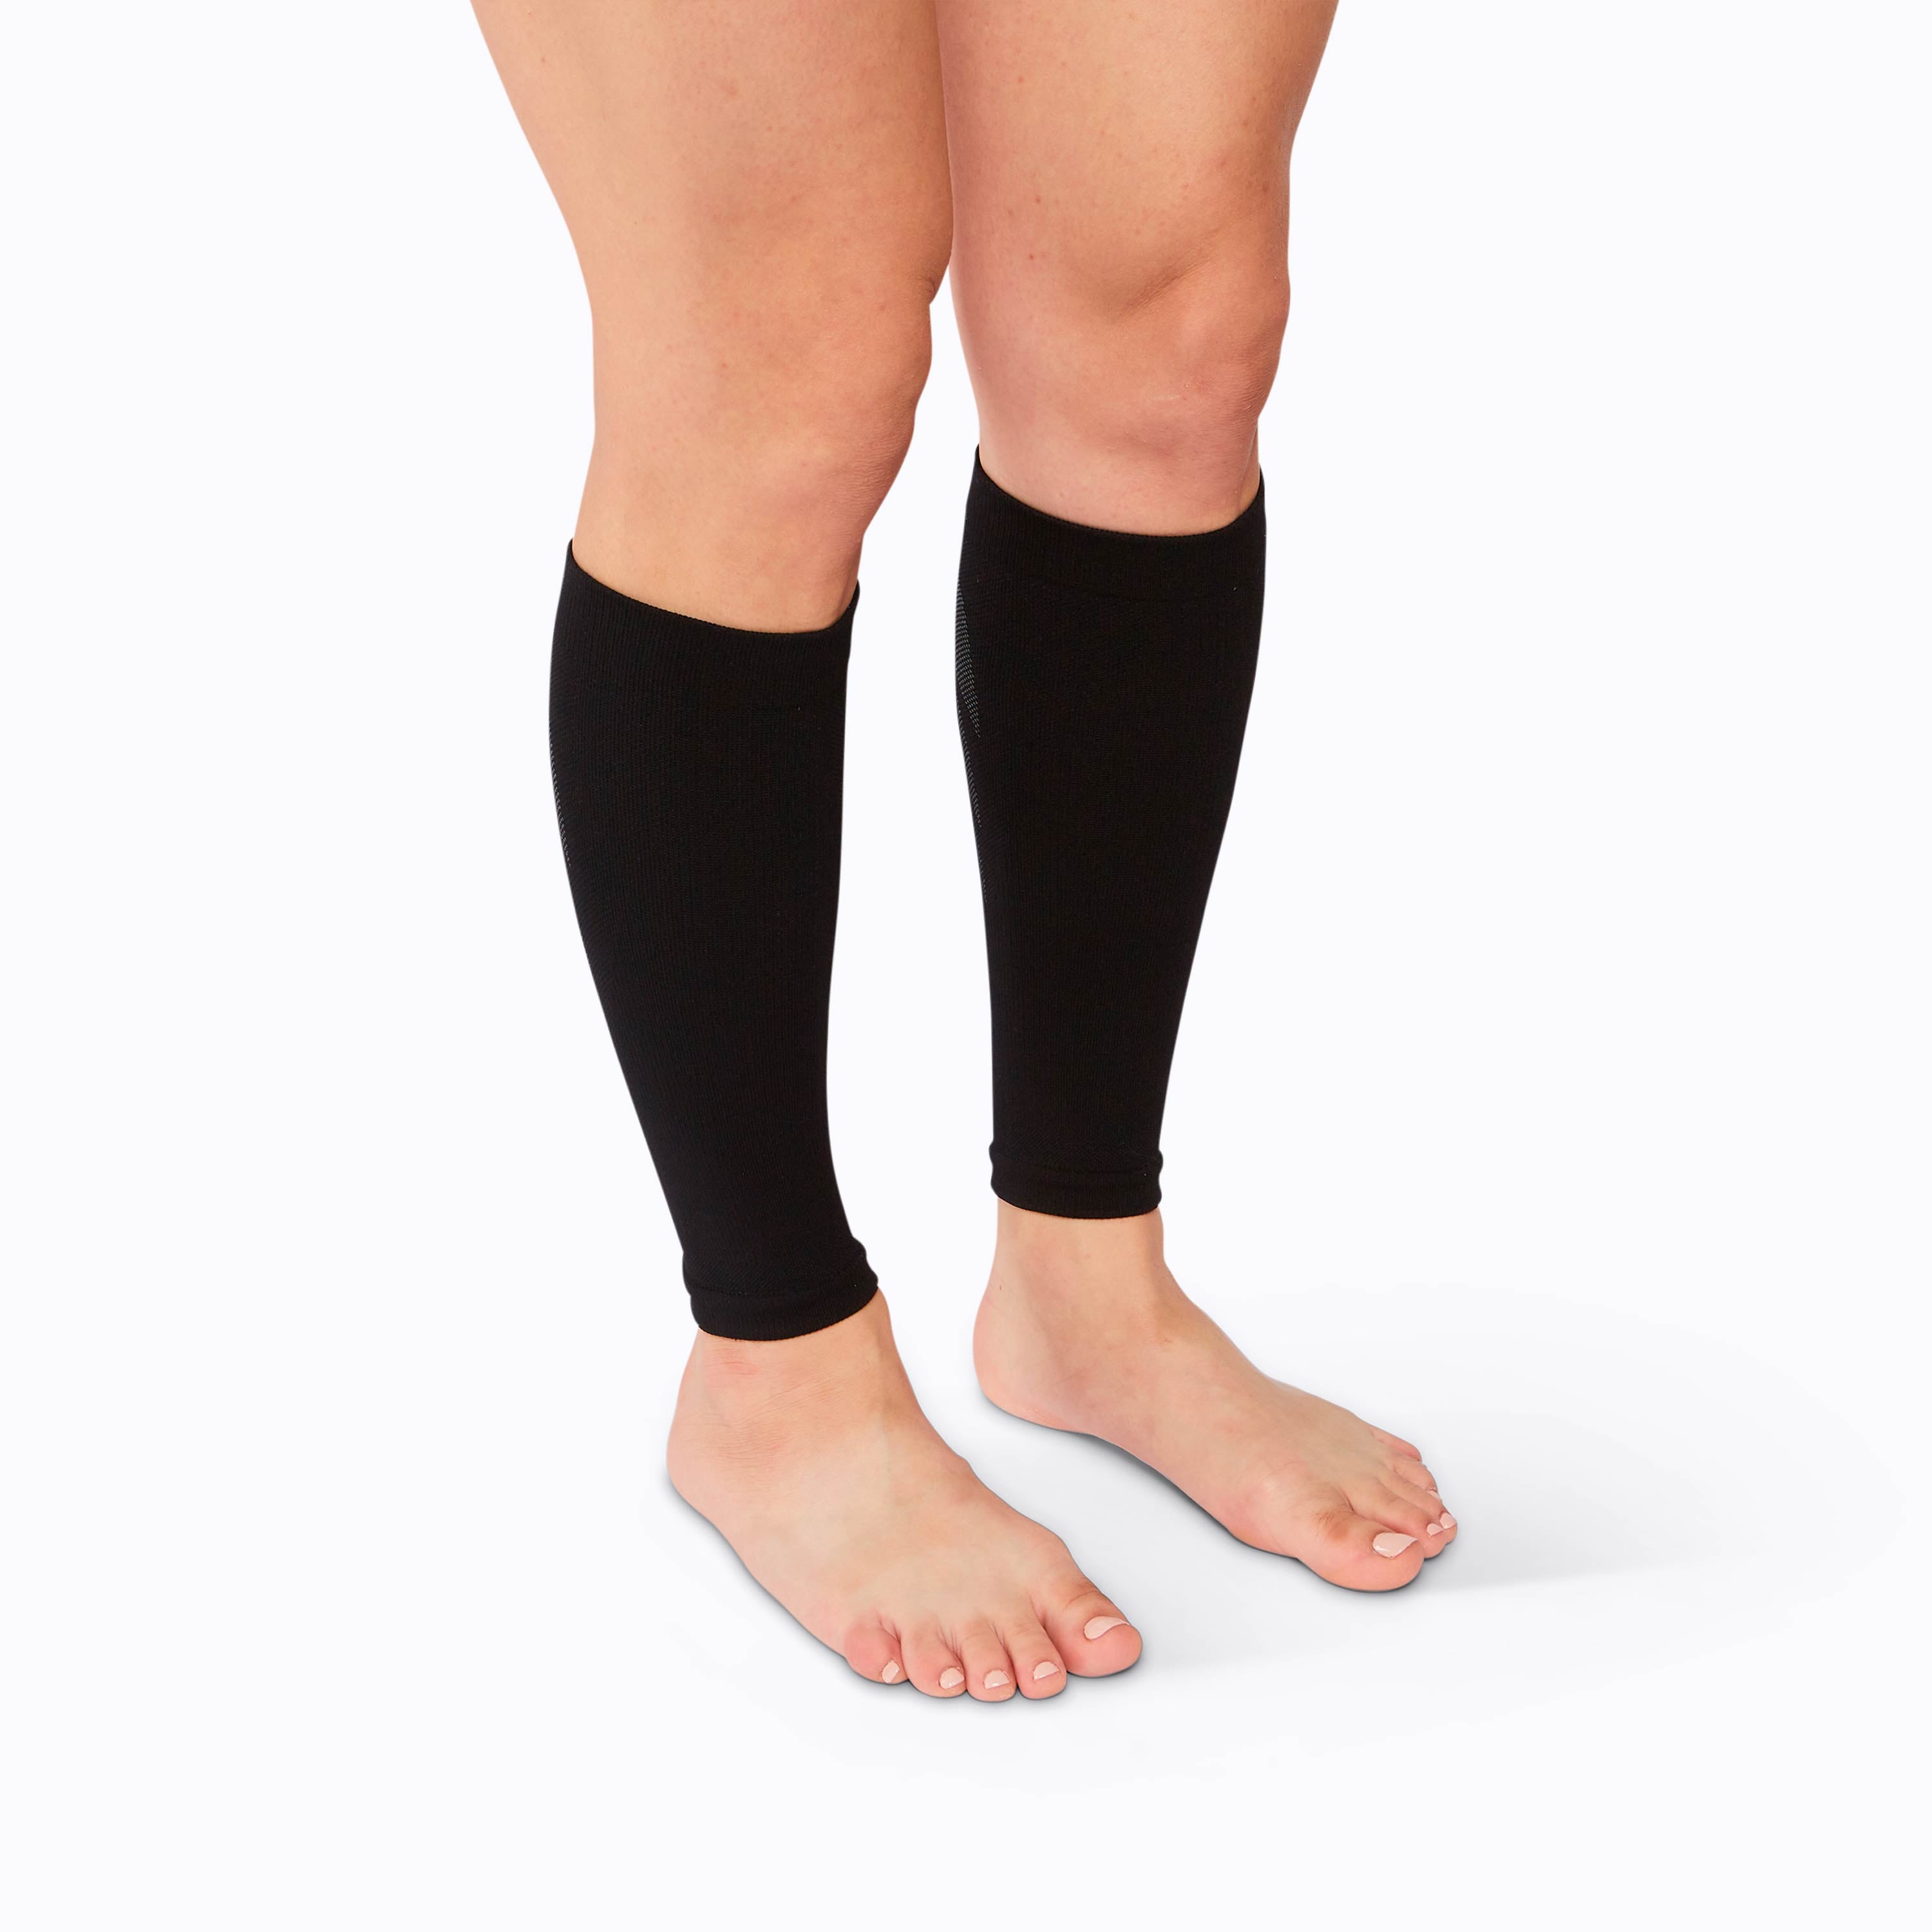 RecoFit Calf Compression Sleeves Review - Strength Running